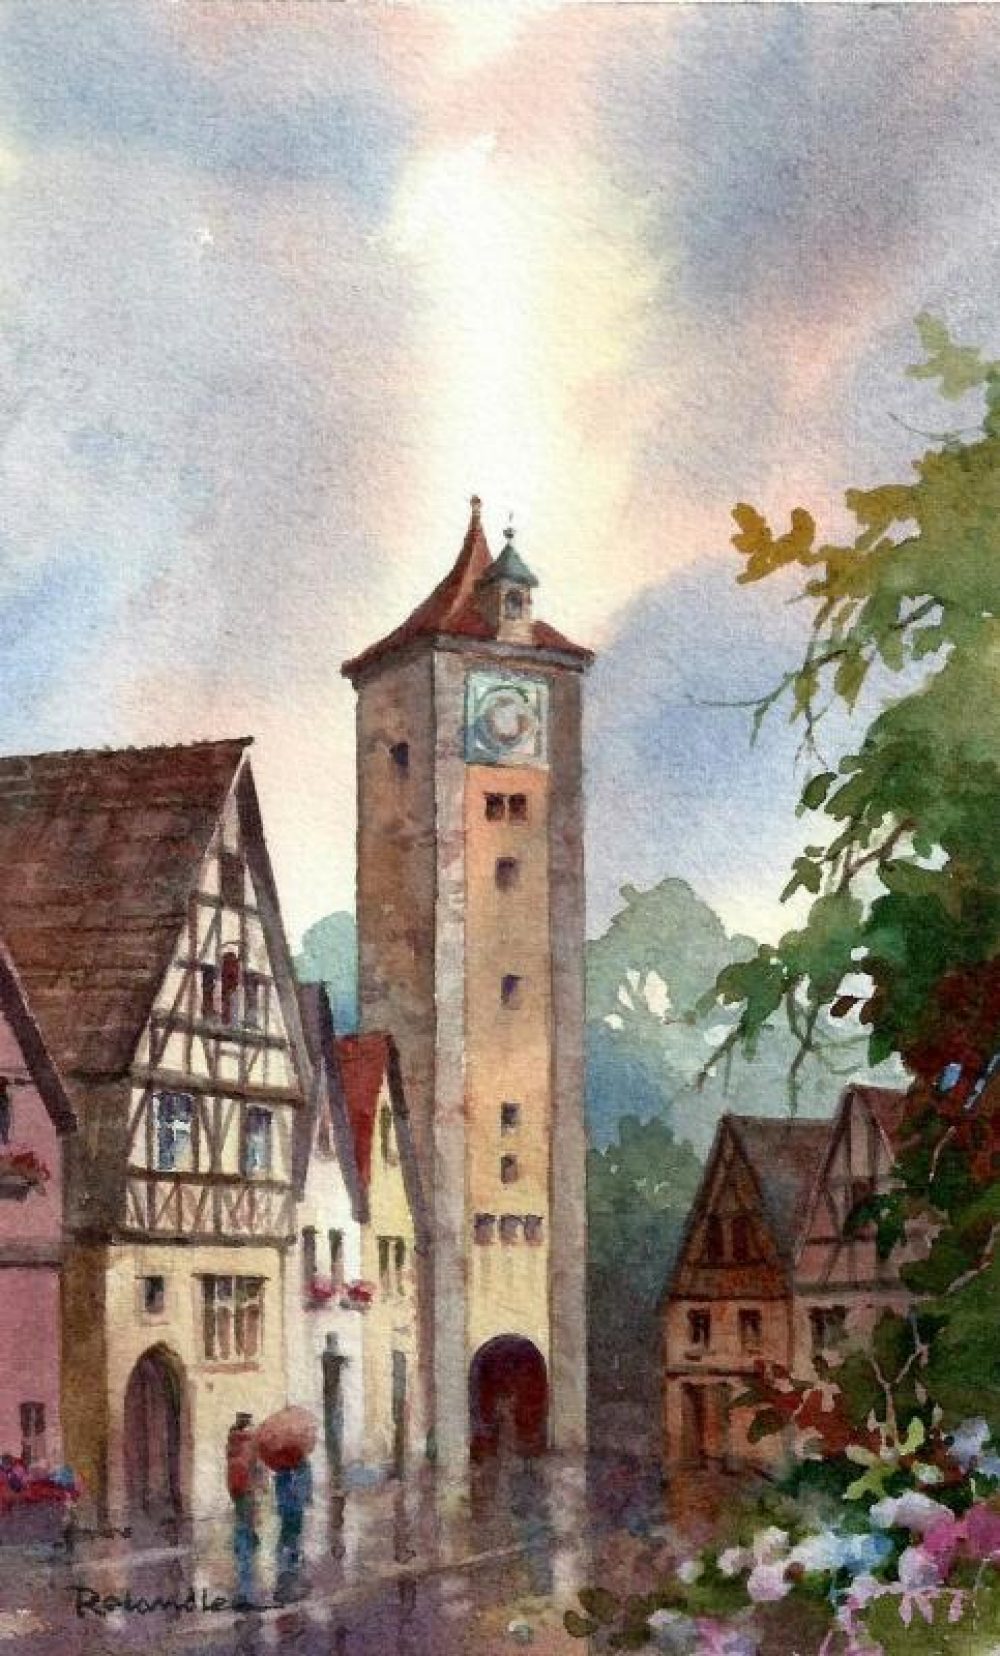 Burgtor Tower in the Rain - Watercolor painting of Rothenburg Germany